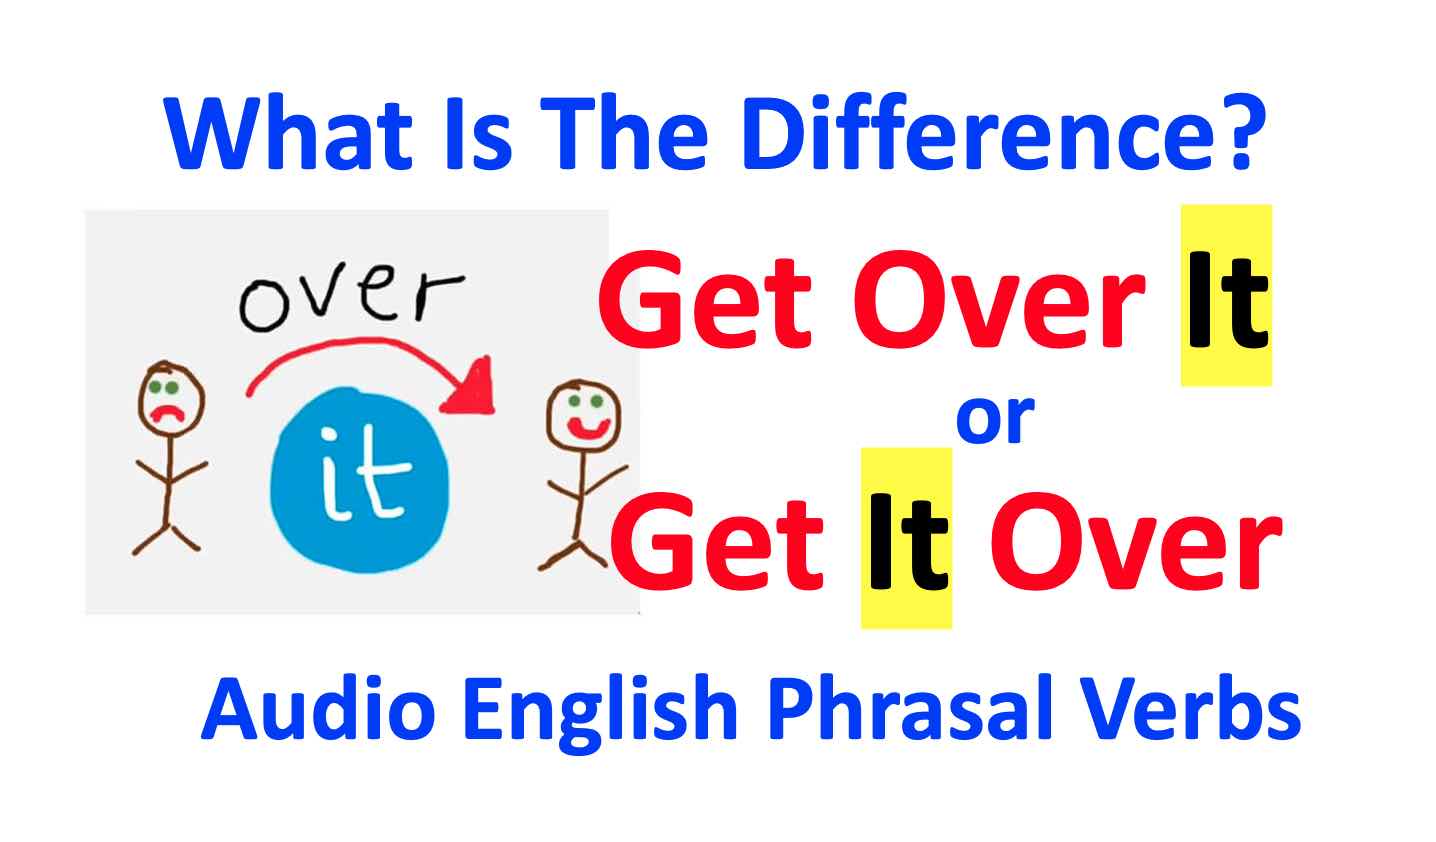 Get Over It or Get It Over - what is the difference between these two phrasal verbs?